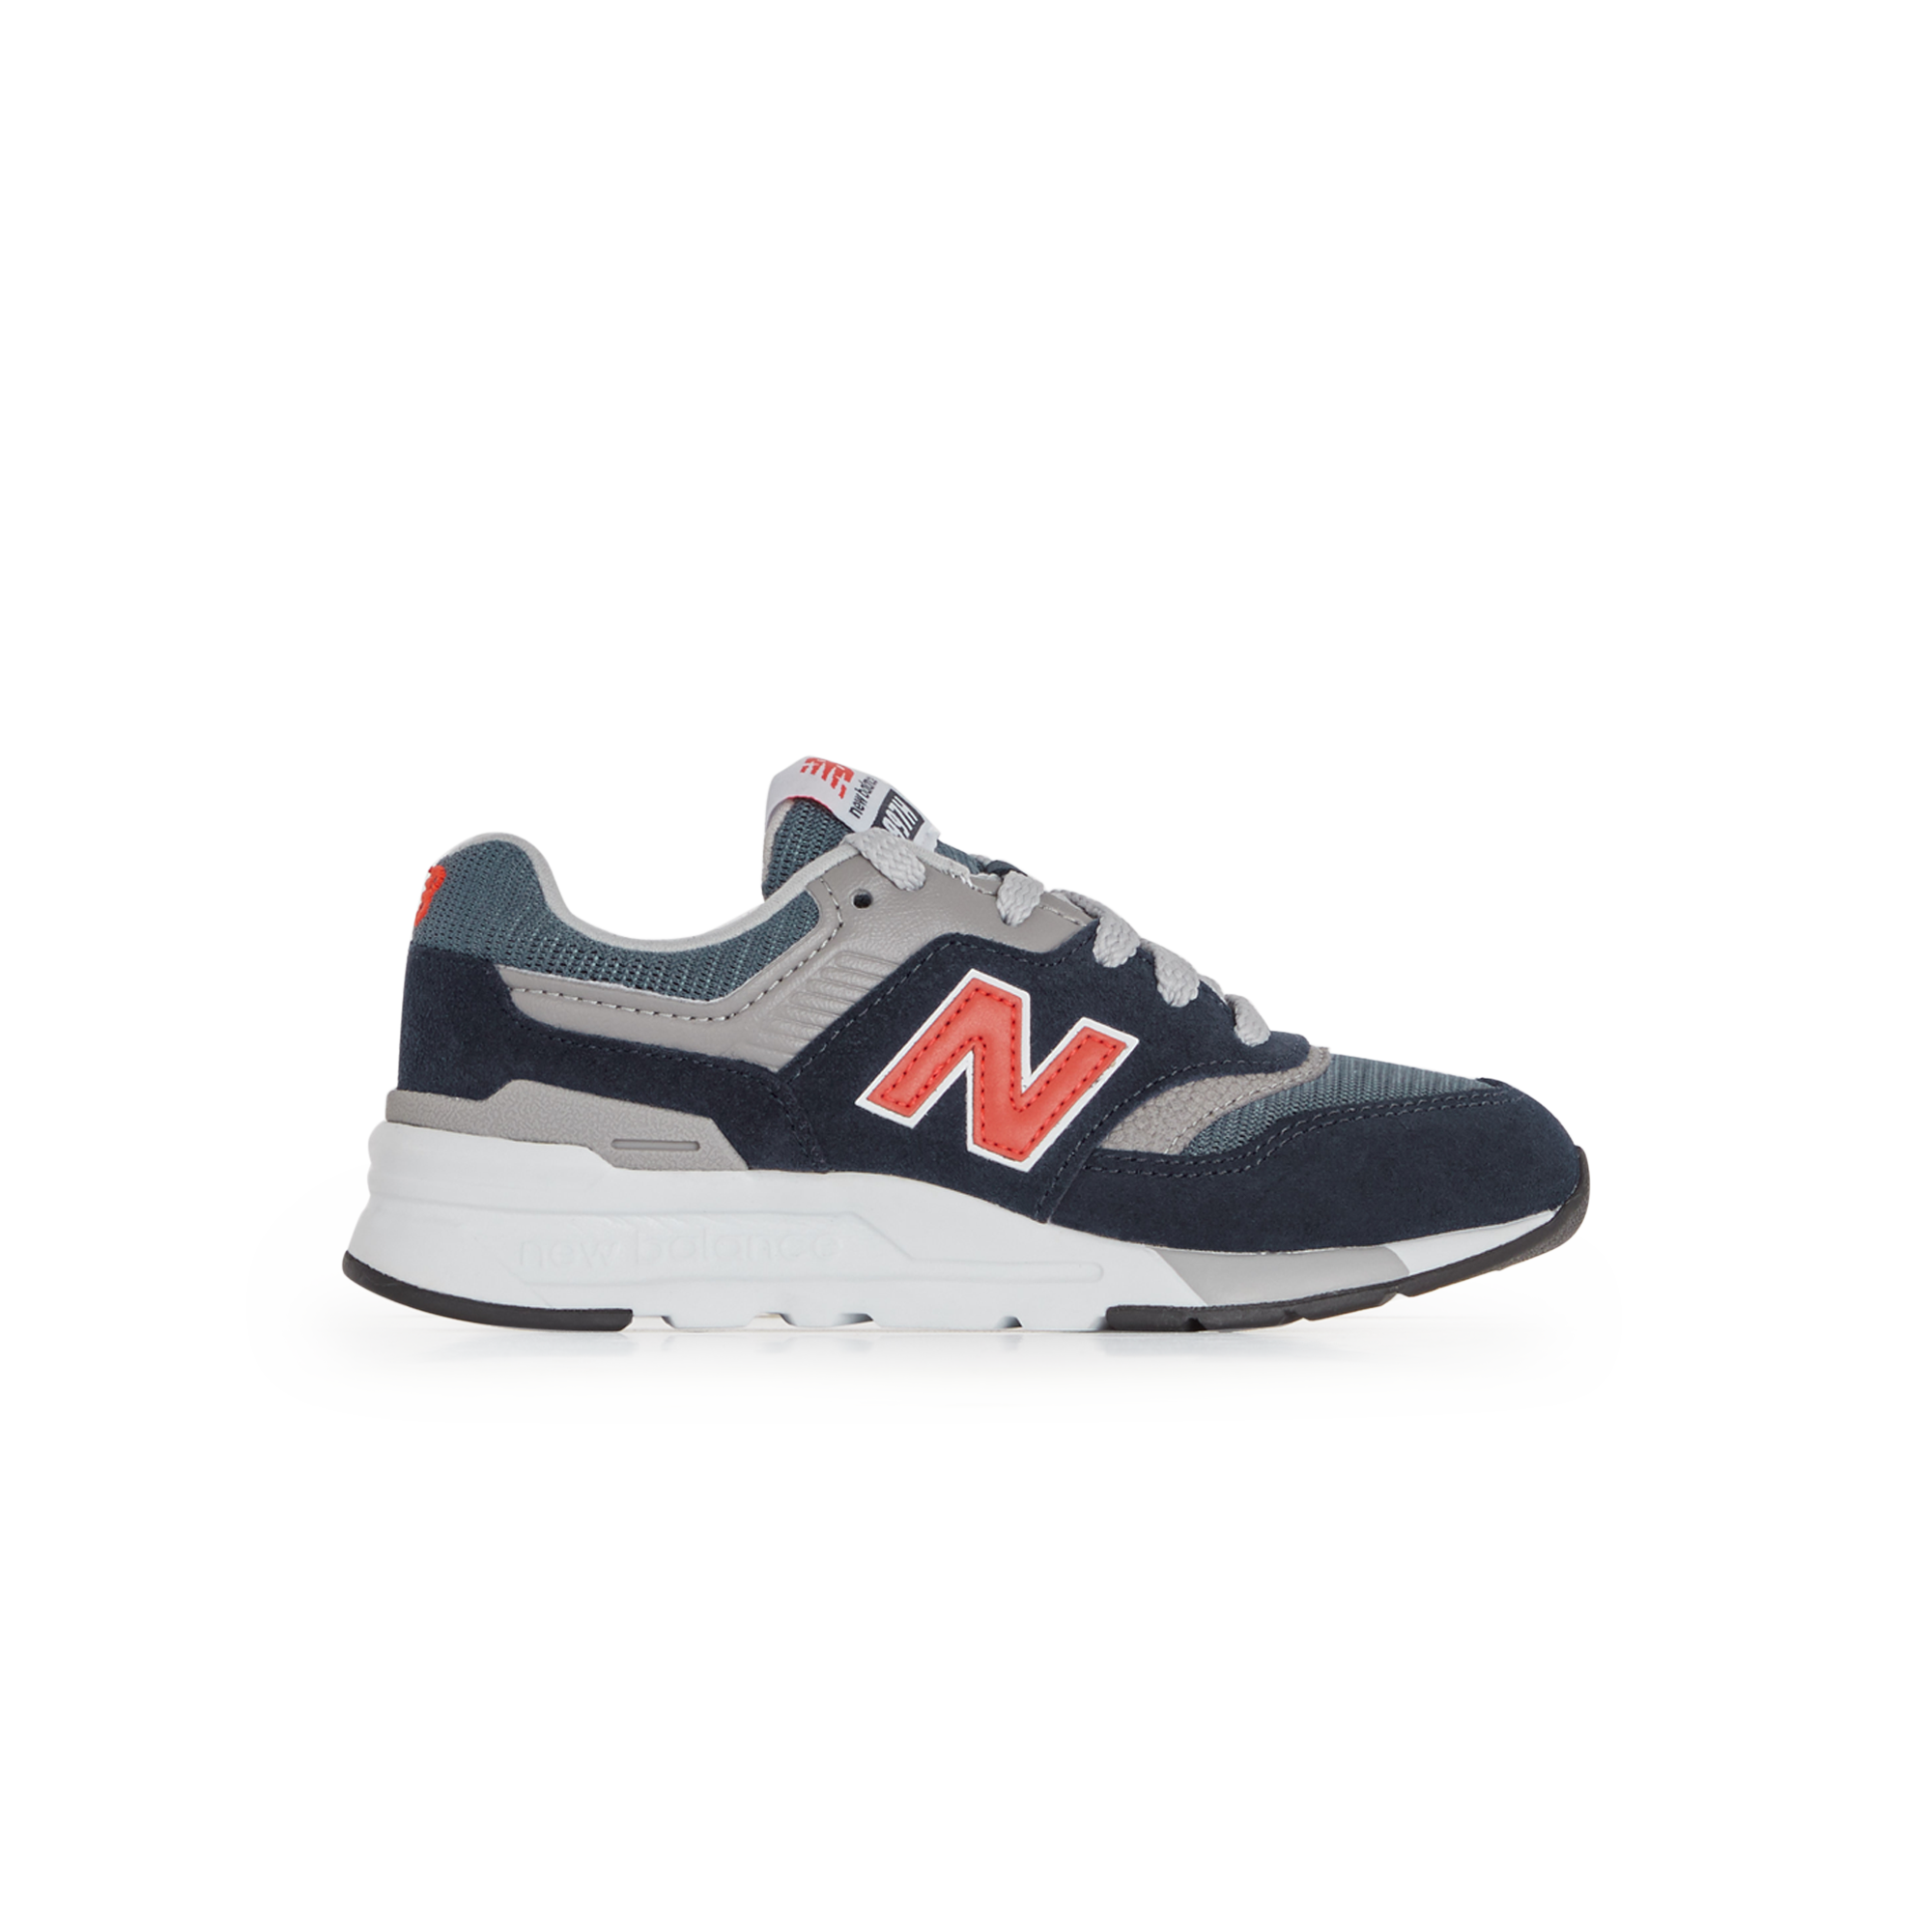 comment taille new balance bebe